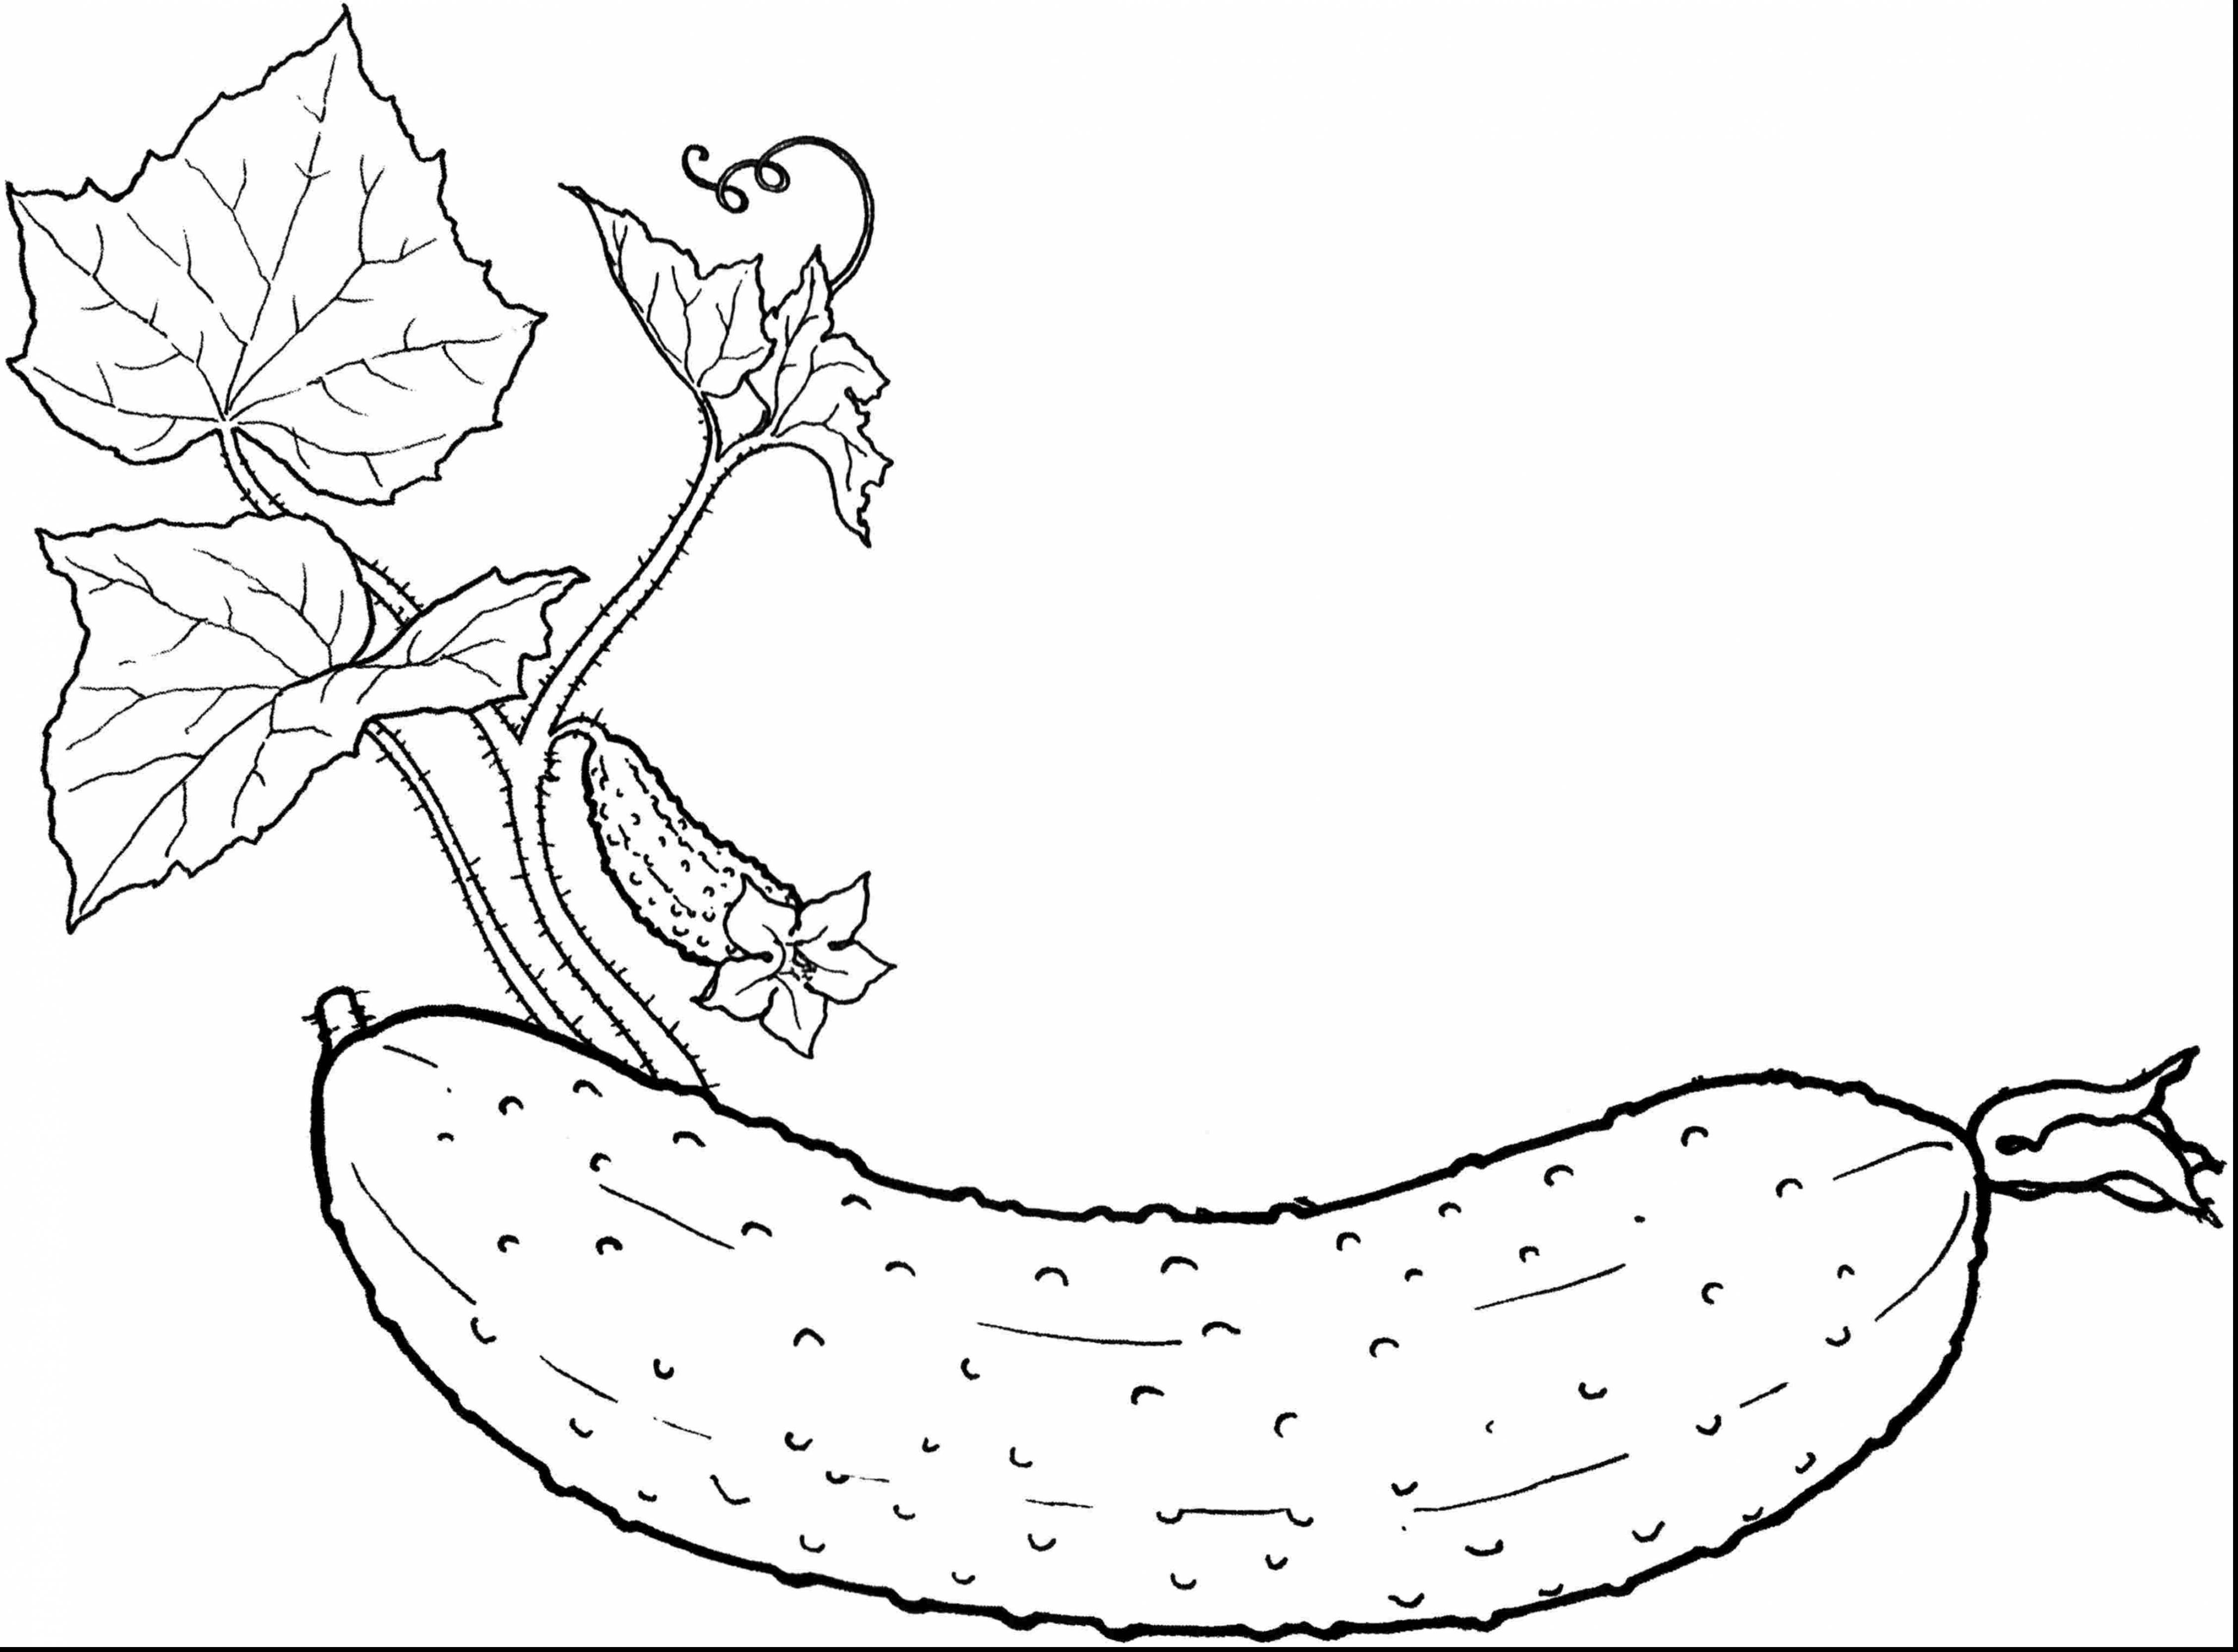 Coloring Cucumber. Category Vegetables. Tags:  cucumbers, vegetables.